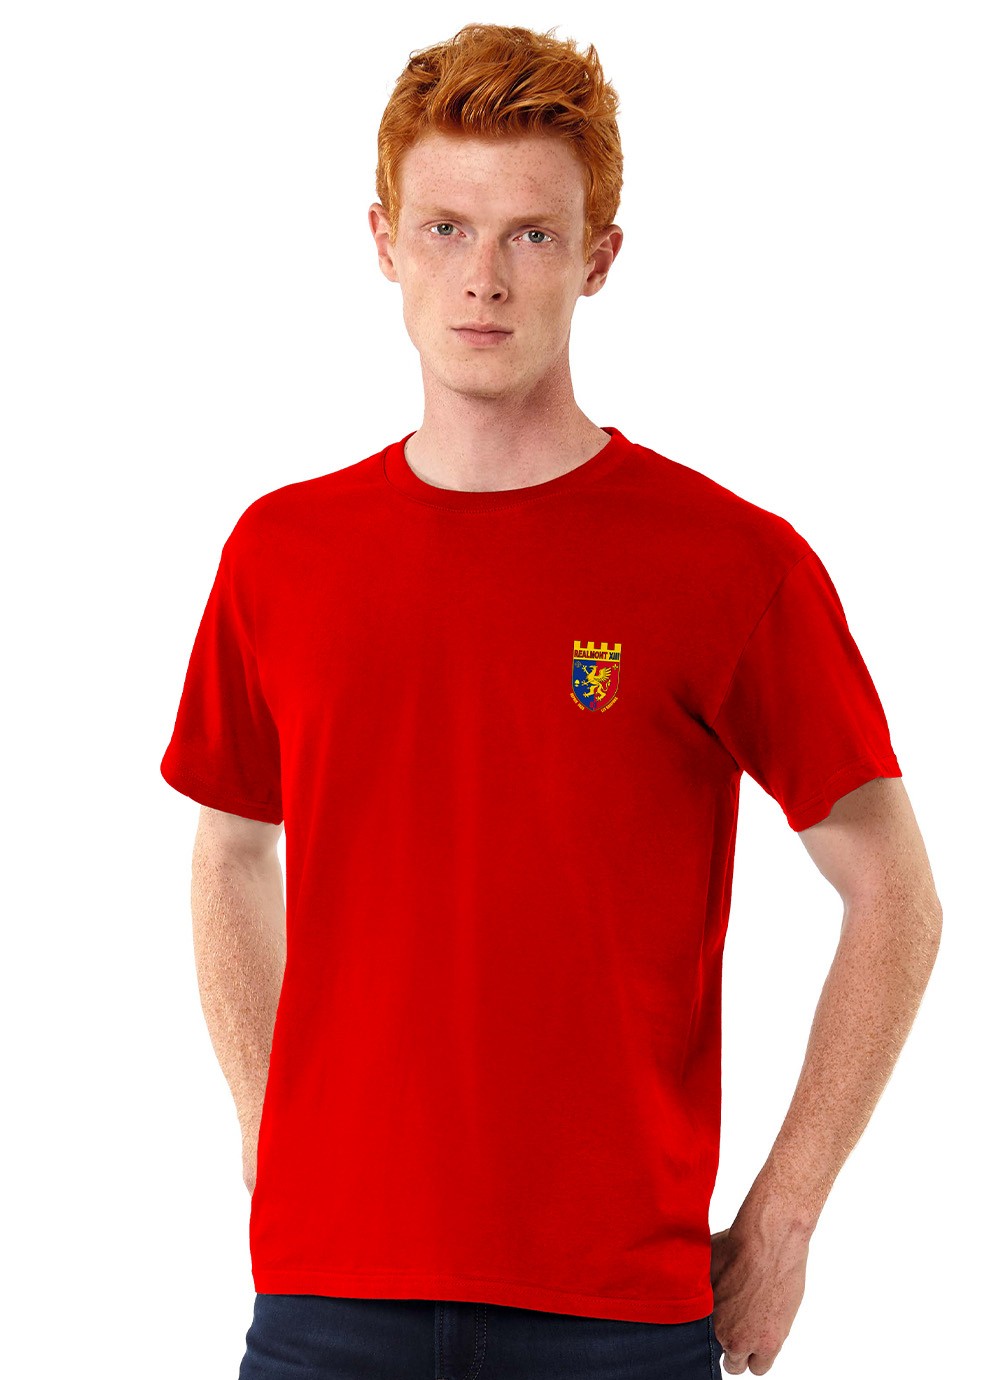 Tshirt homme Realmont XIII rouge